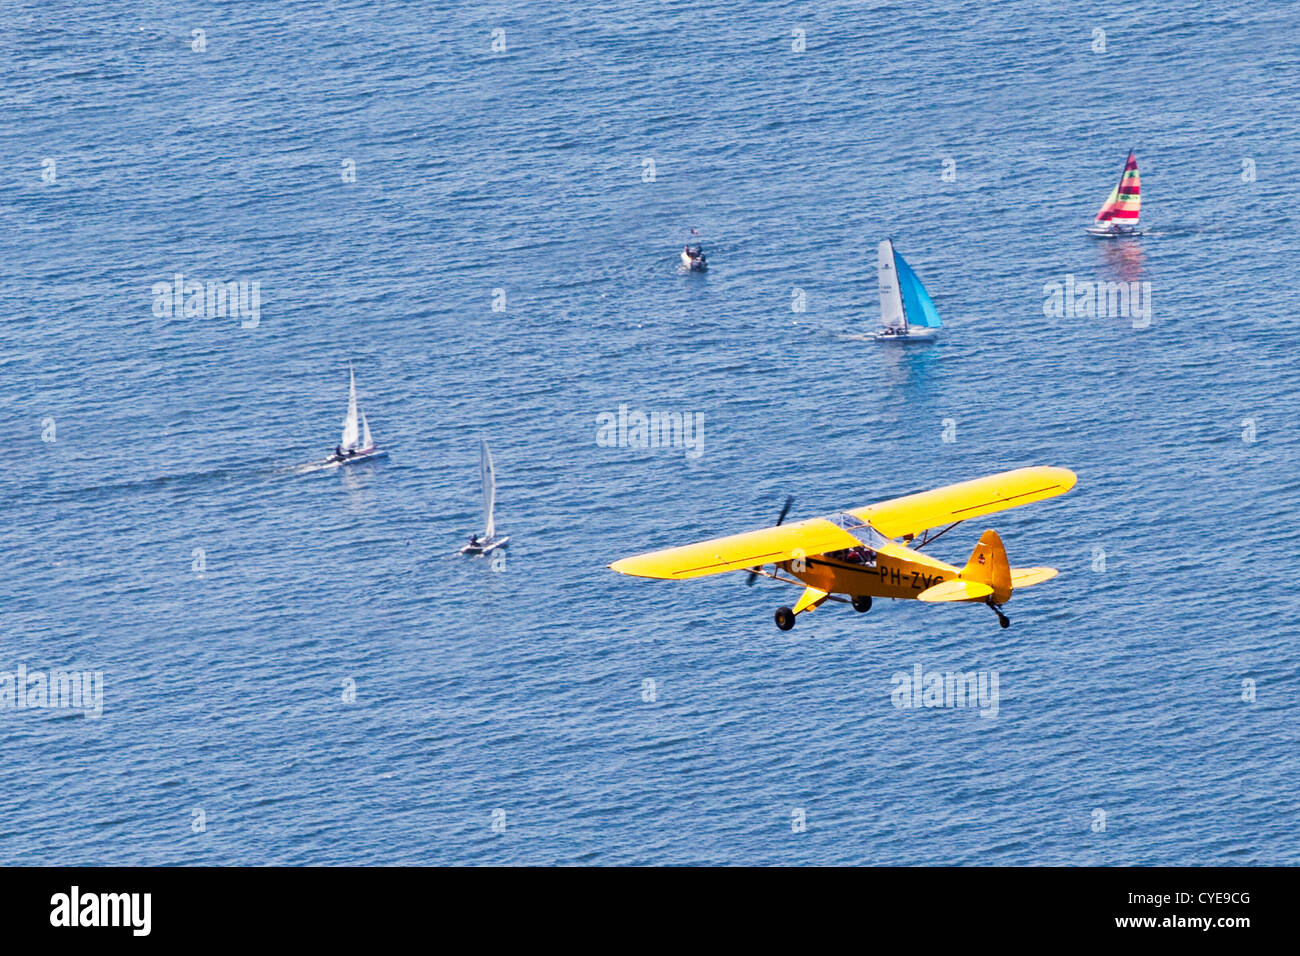 Scheveningen, The Hague. Small airplane, a Piper Cub, flying over catamarans, sailing in the North Sea. Aerial. Stock Photo